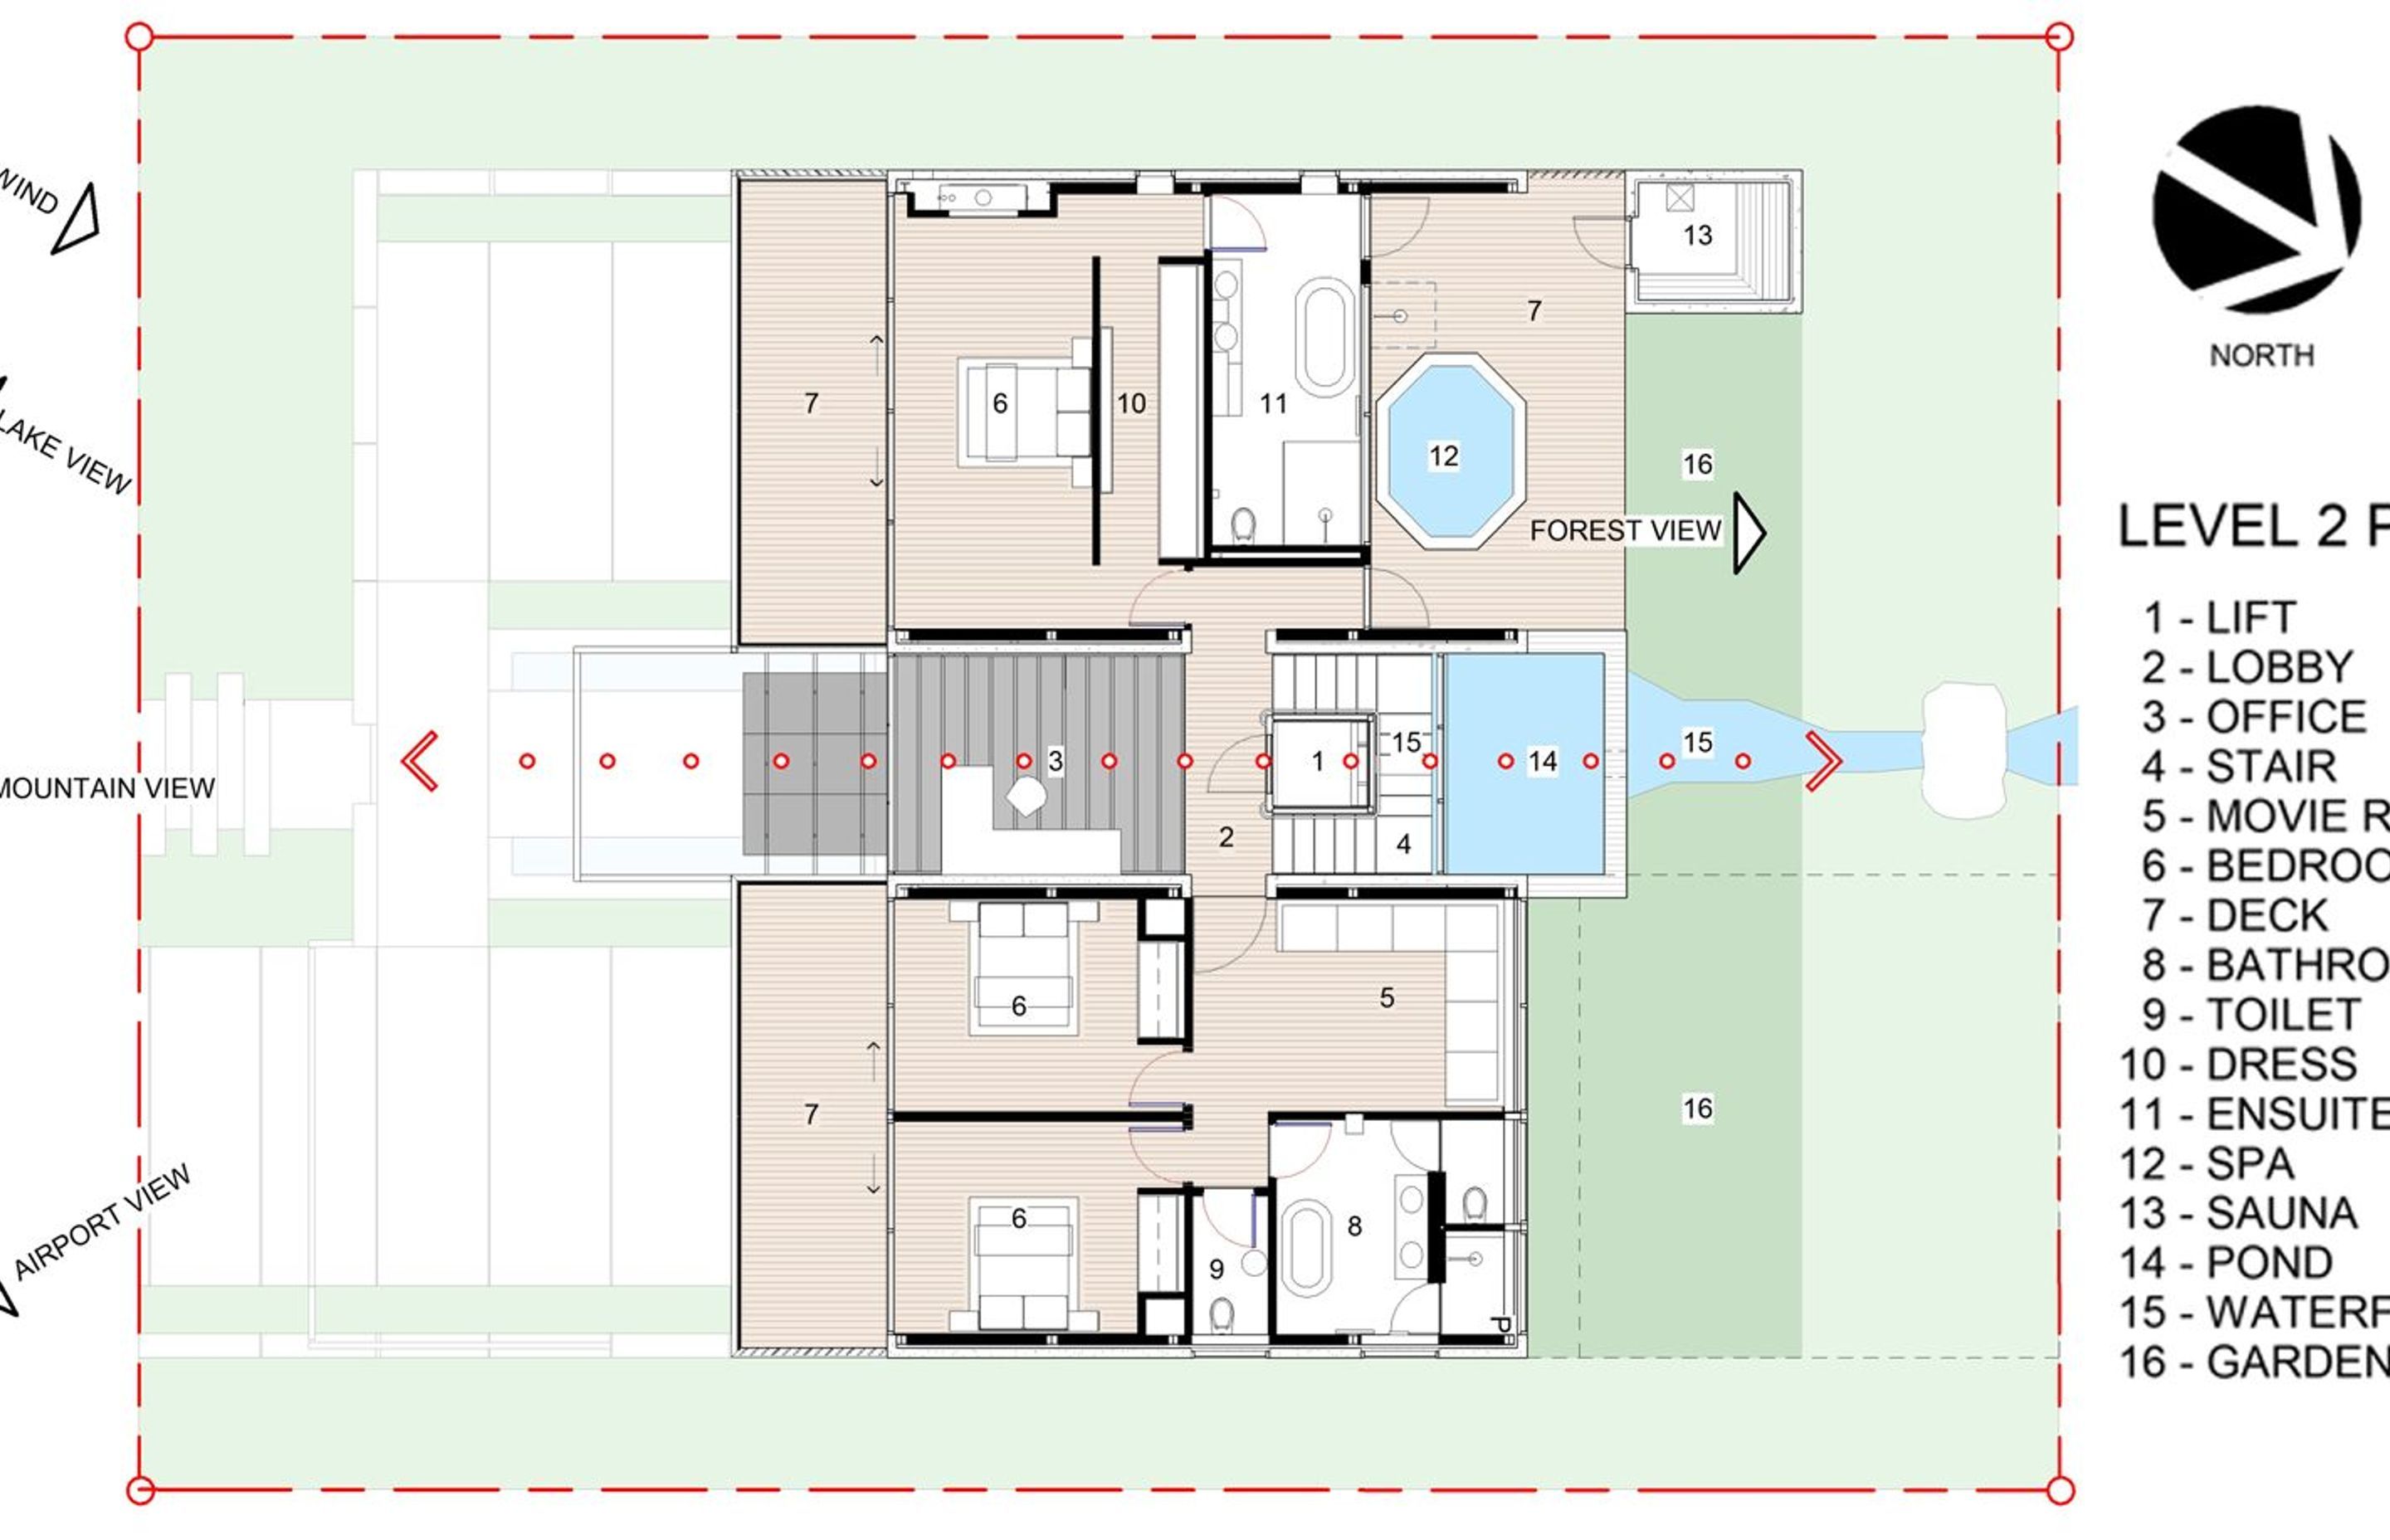 The plan of the second-floor shows the spa and sauna area at the rear of the property which overlooks a waterfall and pond area.